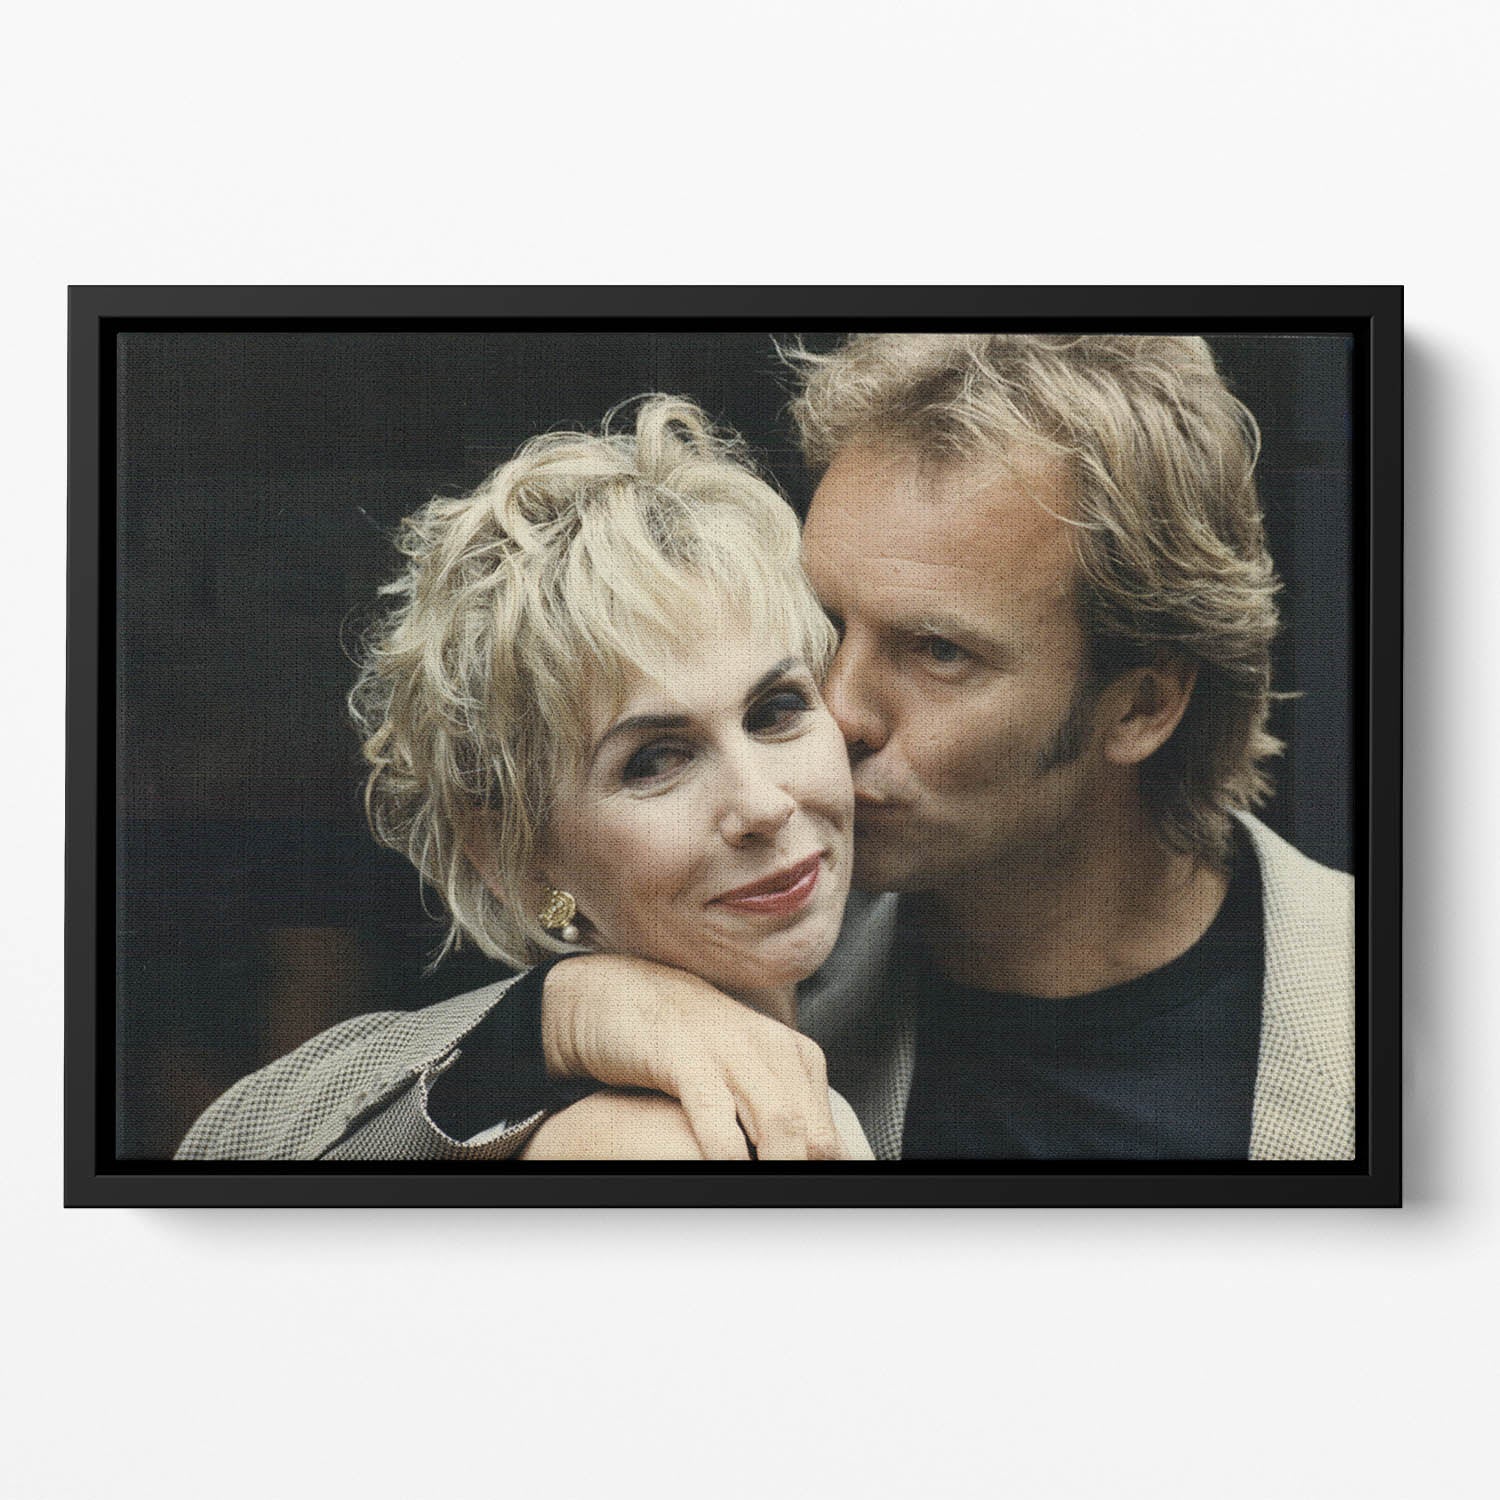 Sting with Trudie Floating Framed Canvas